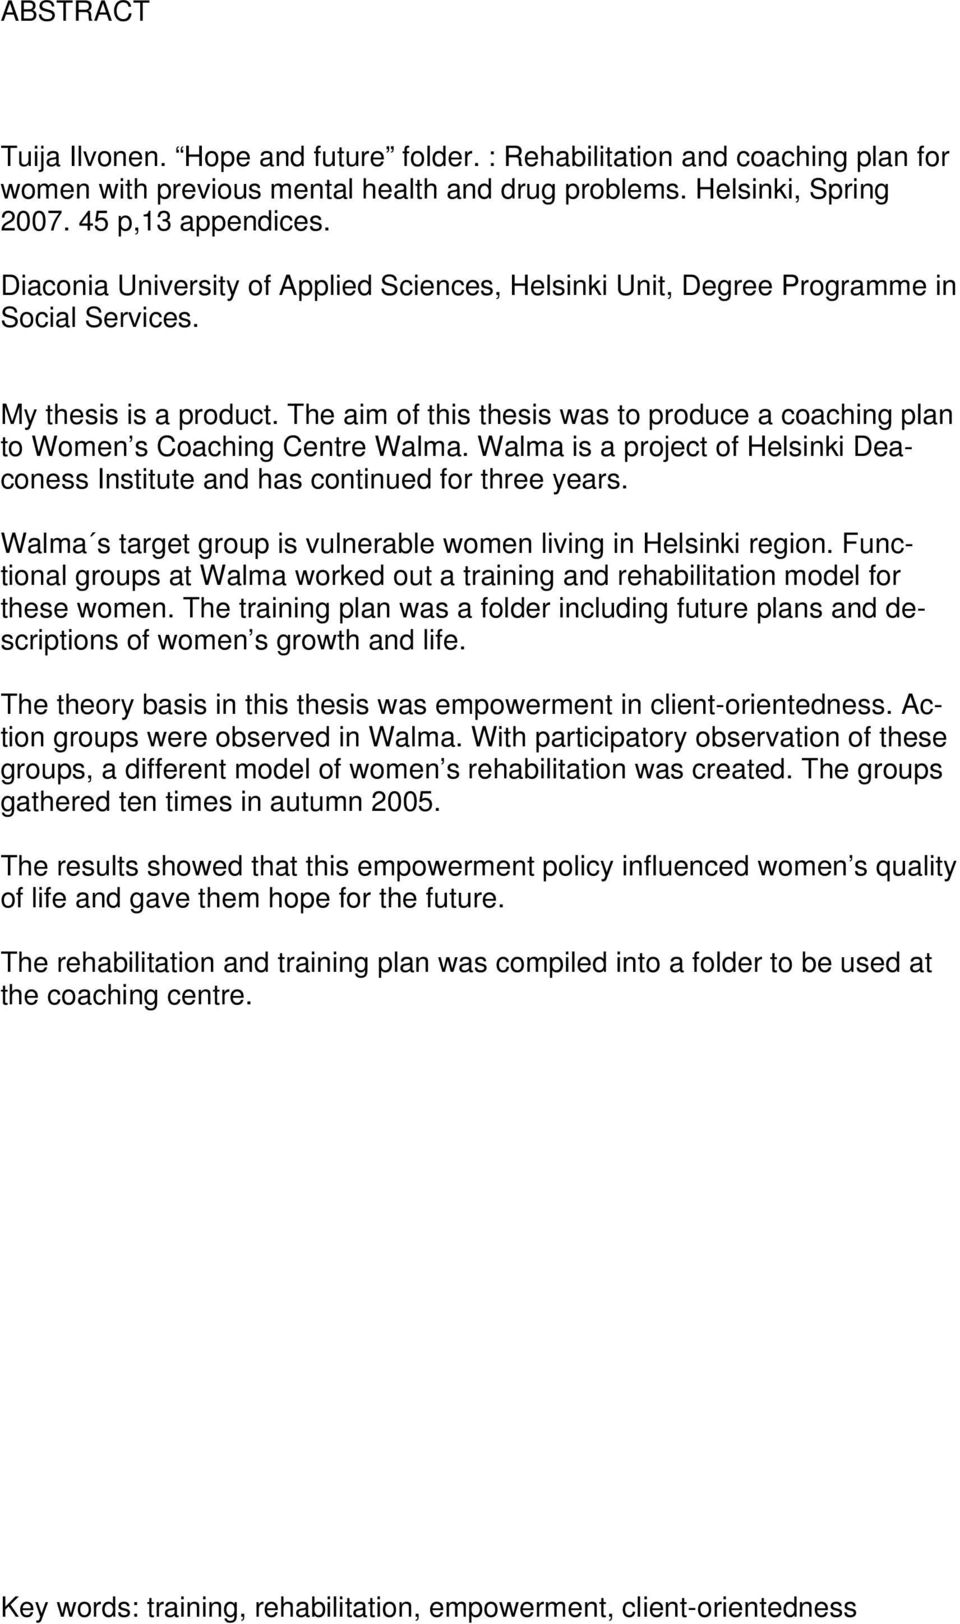 The aim of this thesis was to produce a coaching plan to Women s Coaching Centre Walma. Walma is a project of Helsinki Deaconess Institute and has continued for three years.